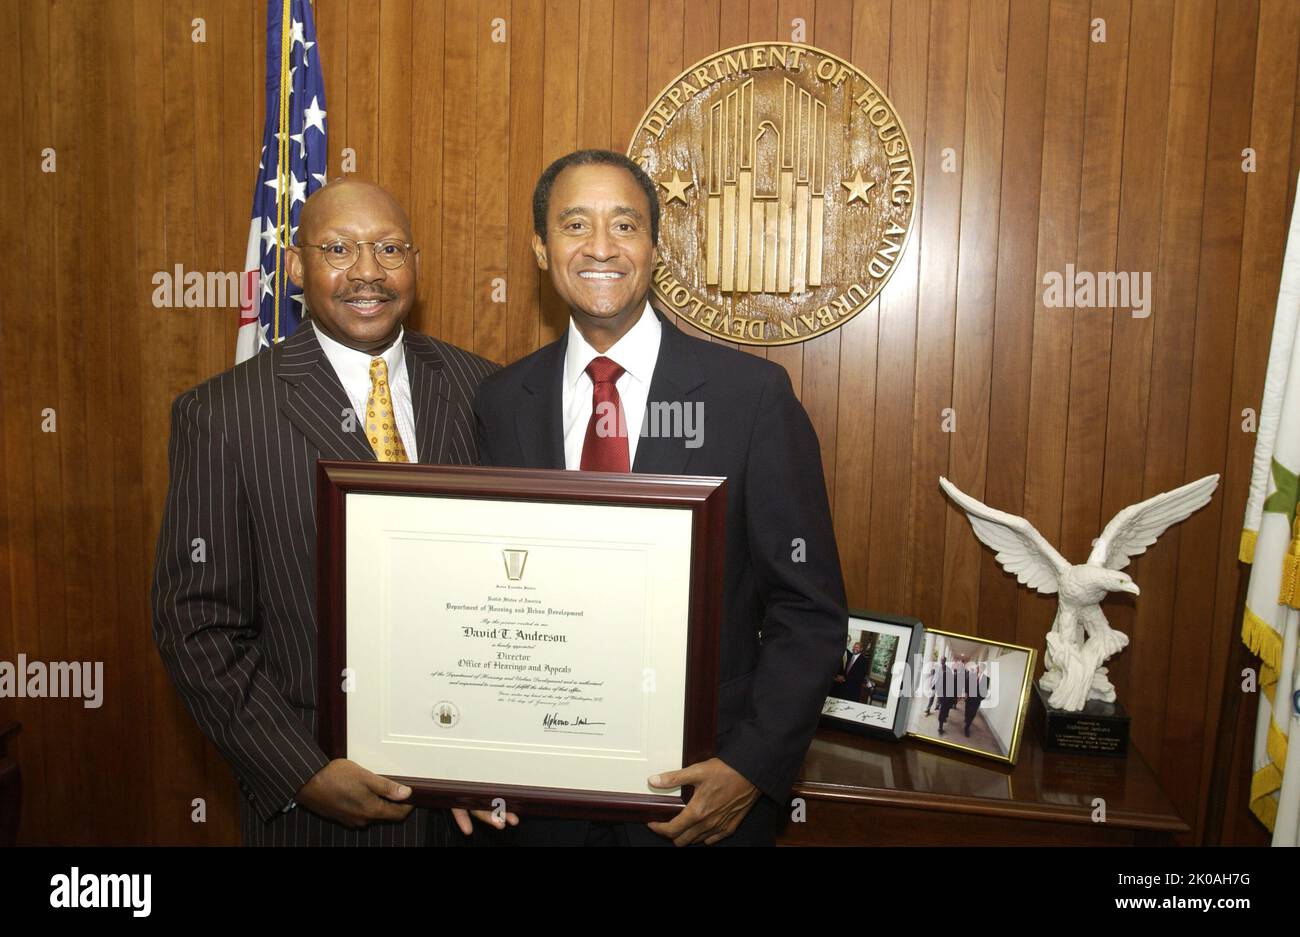 Secretary Alphonso Jackson with David Anderson - Judge David Anderson, newly-appointed Director of the Office of Hearings and Appeals, visiting Secretary's office for meeting with, and receipt of appointment certificate from, Secretary Alphonso Jackson at HUD Headquarters. Secretary Alphonso Jackson with David Anderson Subject, Judge David Anderson, newly-appointed Director of the Office of Hearings and Appeals, visiting Secretary's office for meeting with, and receipt of appointment certificate from, Secretary Alphonso Jackson at HUD Headquarters. Stock Photo